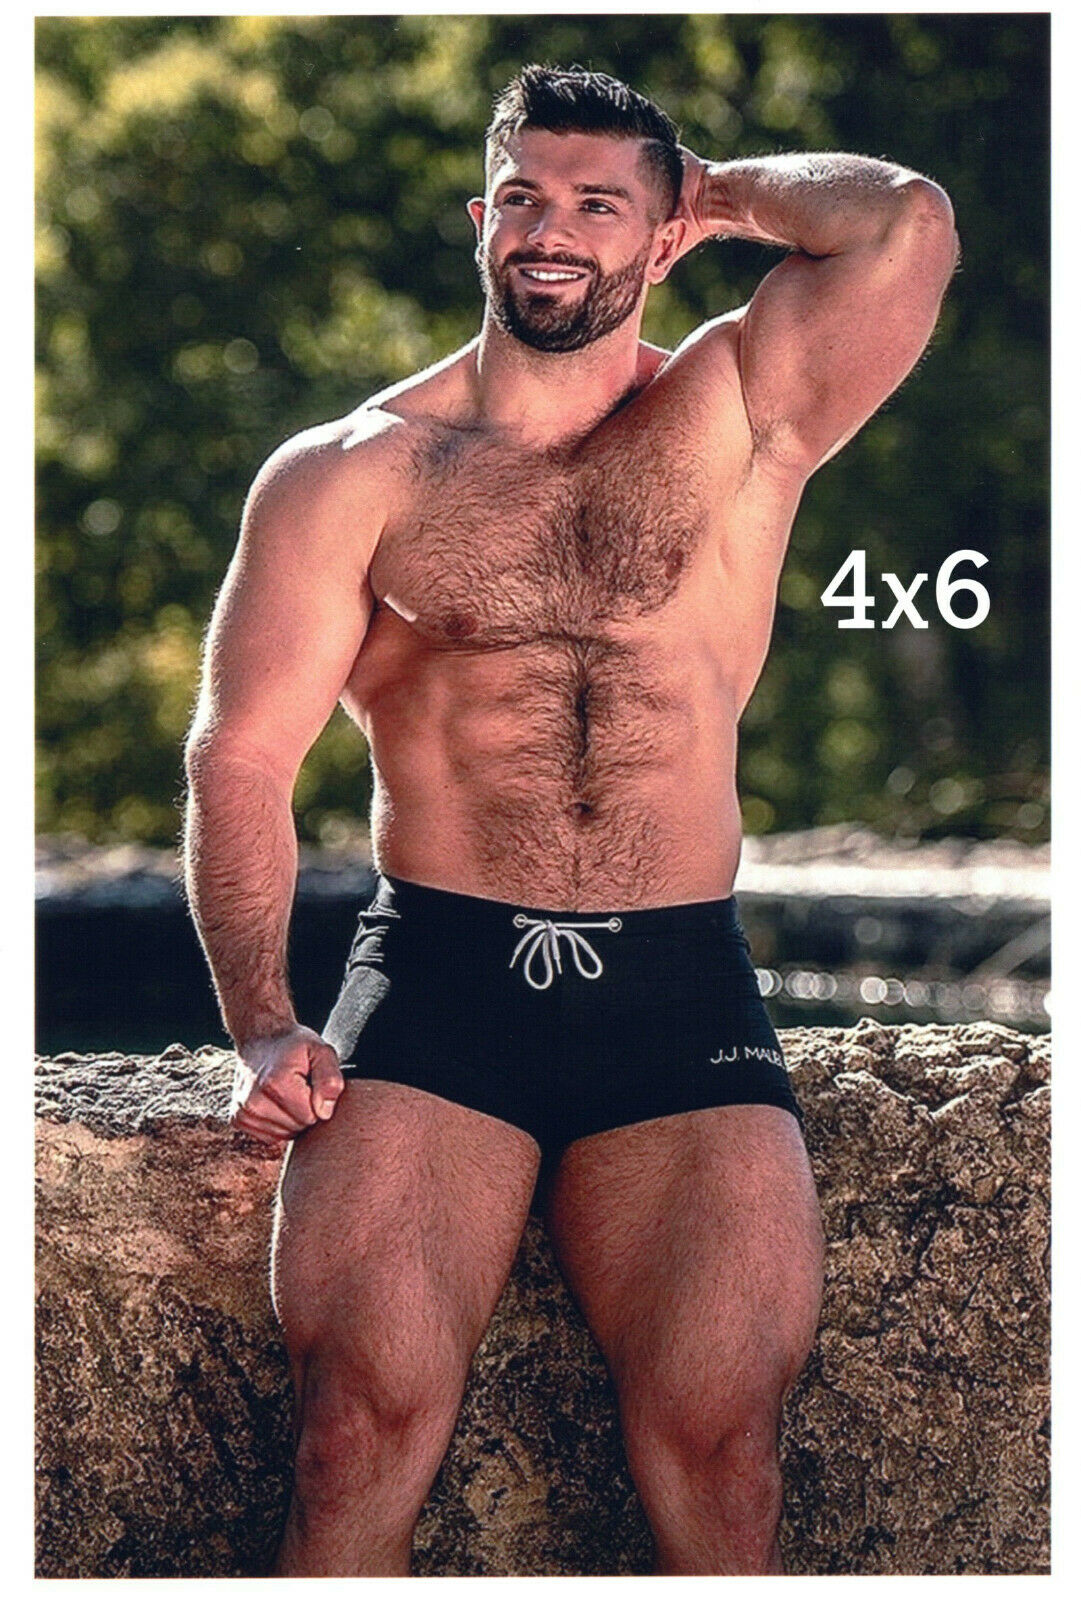 Shirtless Hairy Chest Male N Underwear Muscular Thick Thighs Legs Gay 4x6 Photo